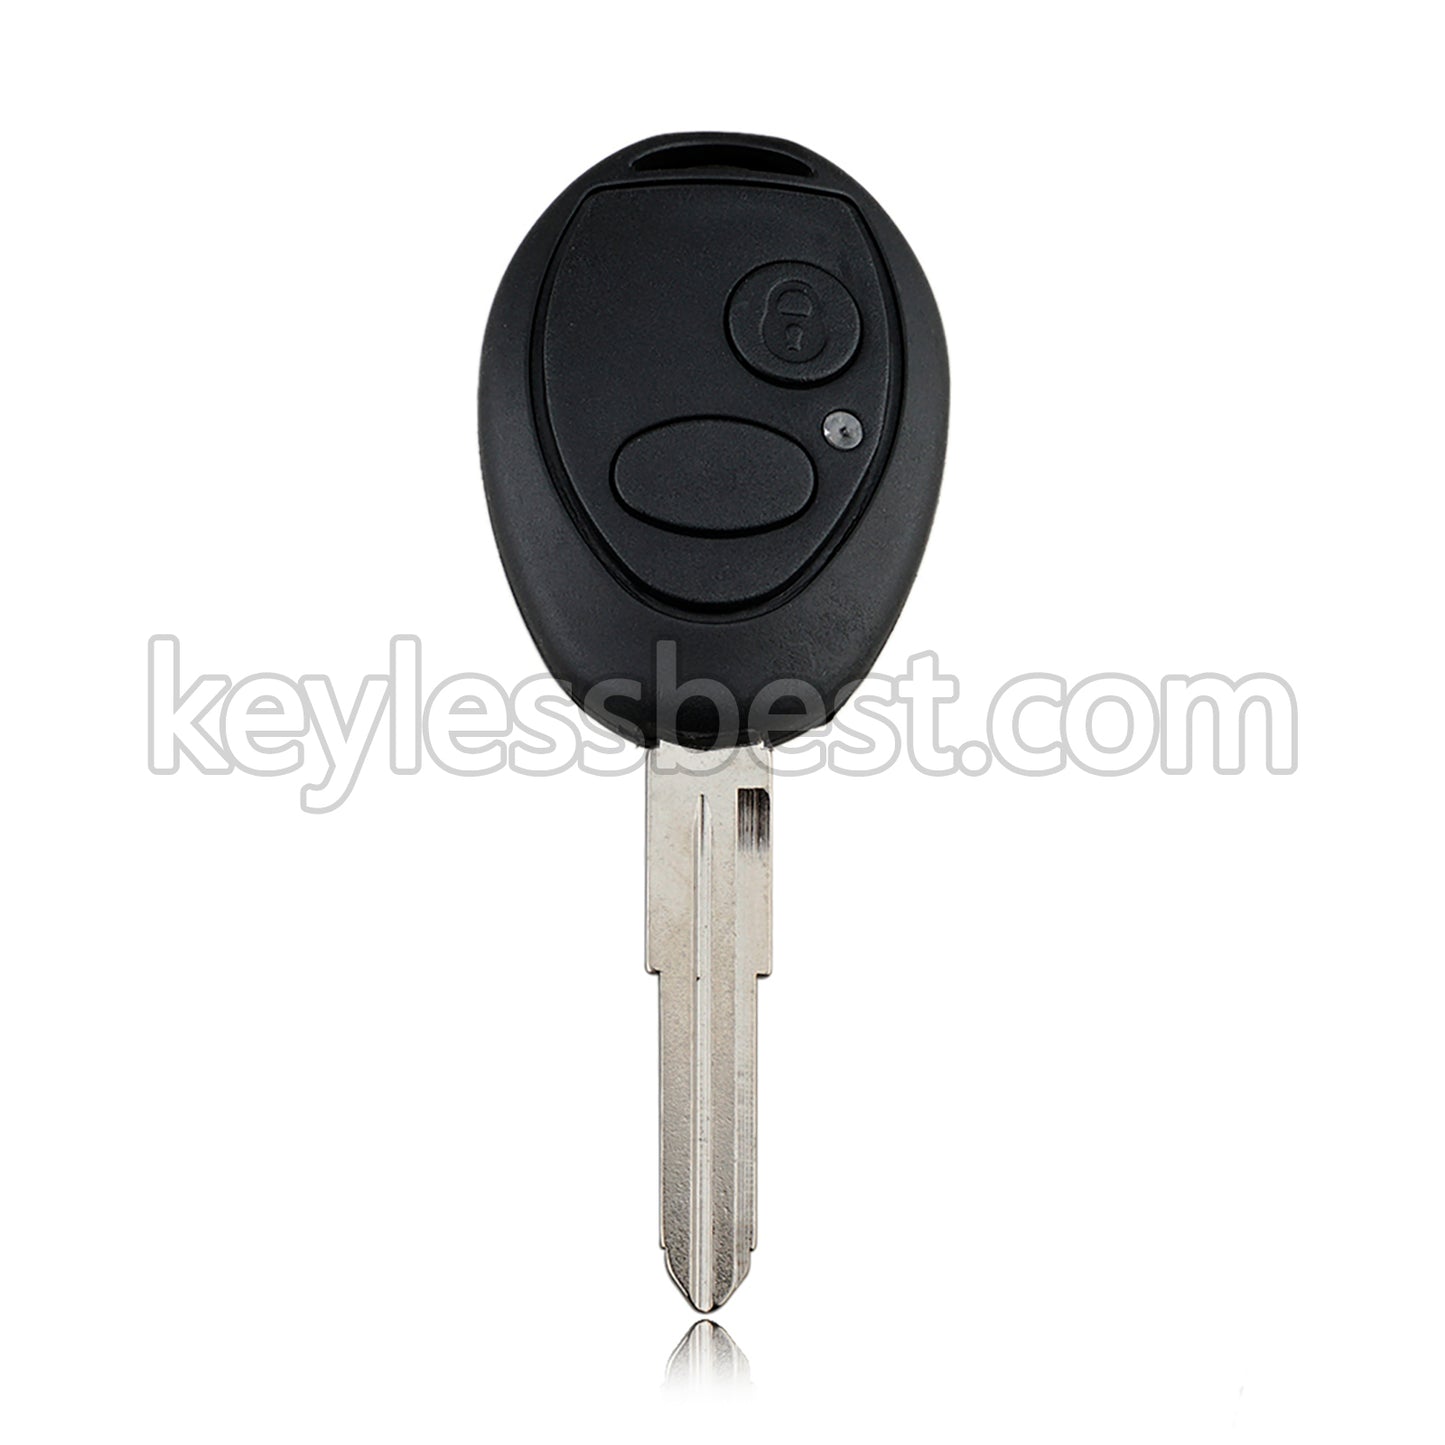 1999-2004 Rover Discovery / 2 Buttons Remote Key / N5FVALTX3 CWE100710KIT / 315MHz